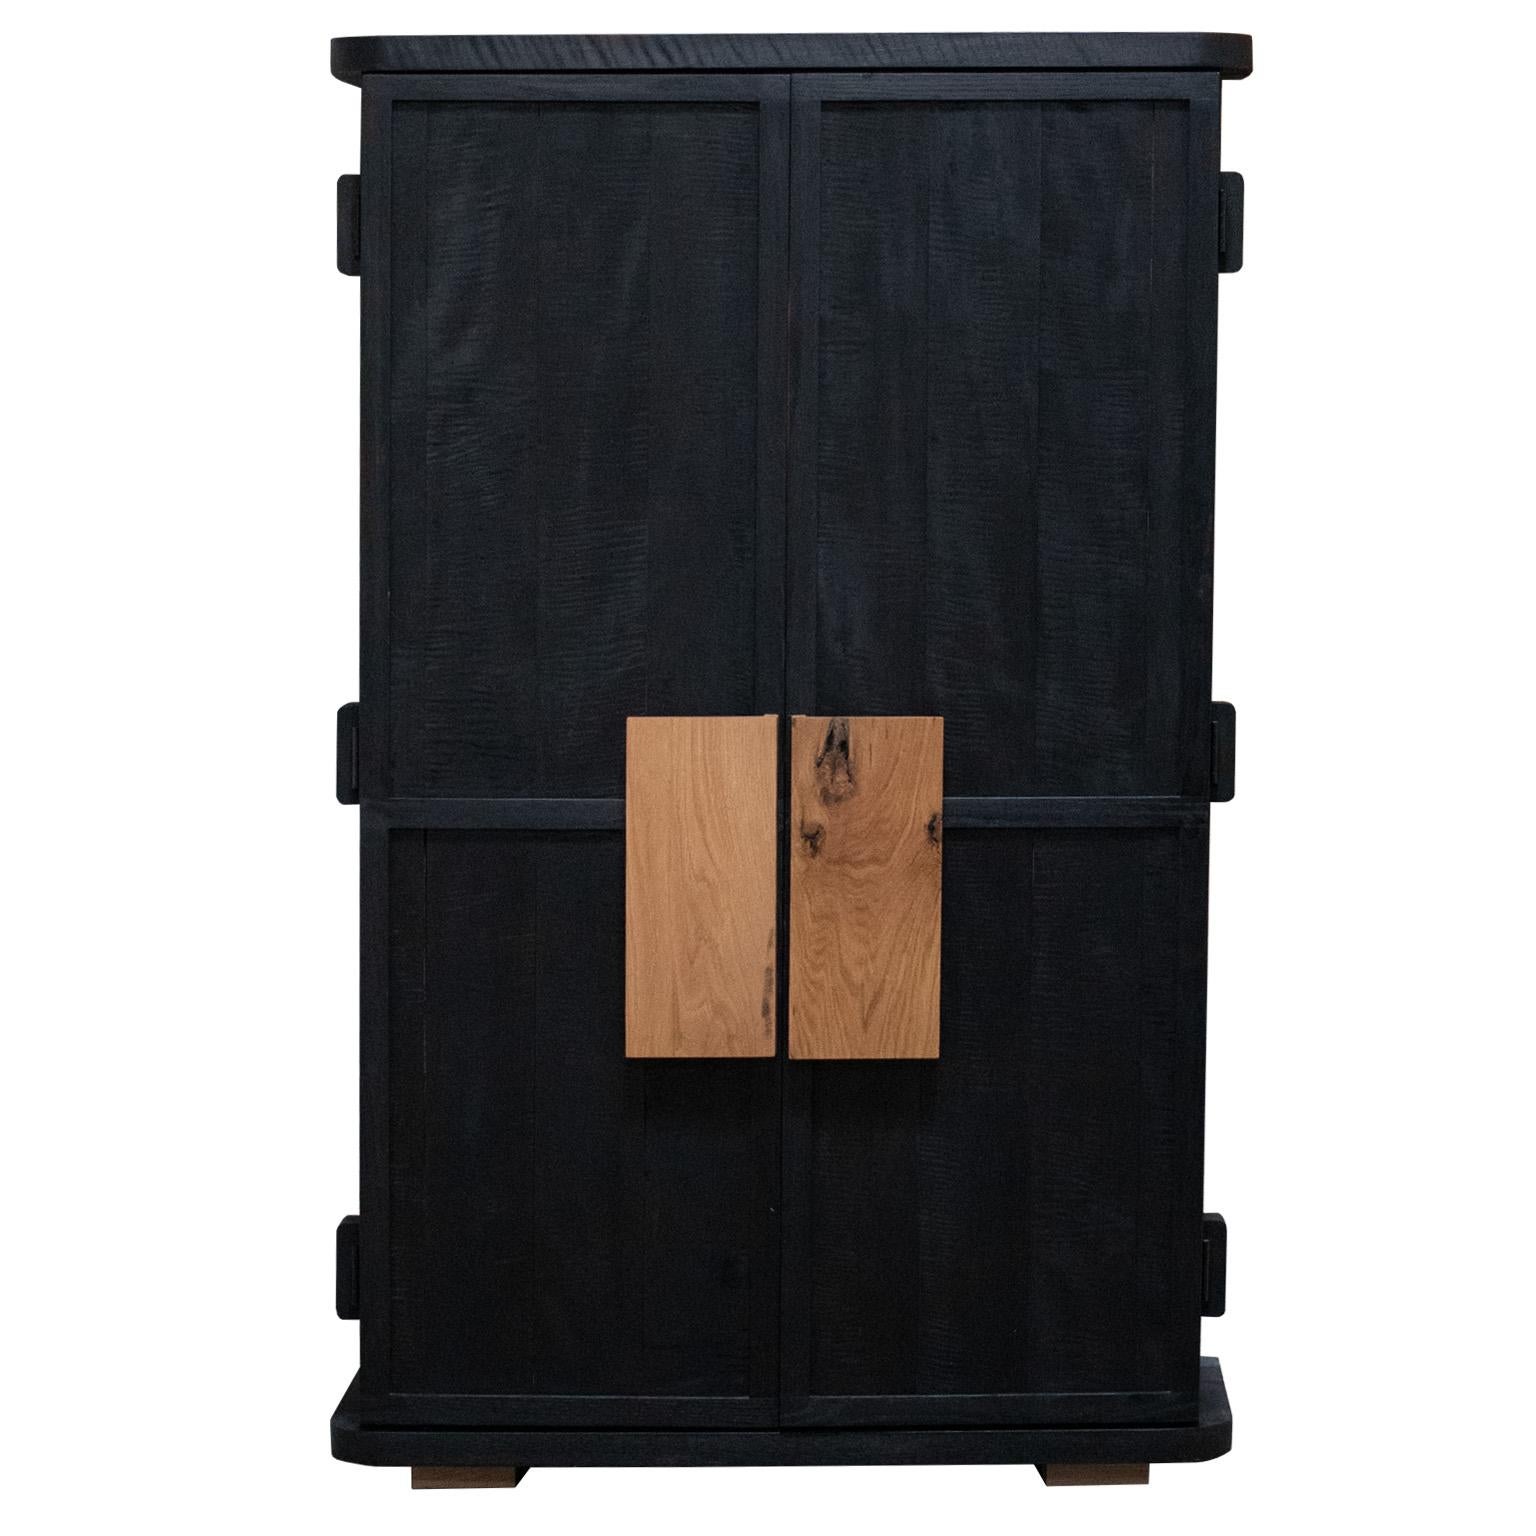 Elevate your space with the luxurious Florentino Black Cabinet. Expertly crafted from premium figured maple, white oak, and walnut woods, this hand made armoire is a stunning piece of furniture that will captivate your guests. The interior is